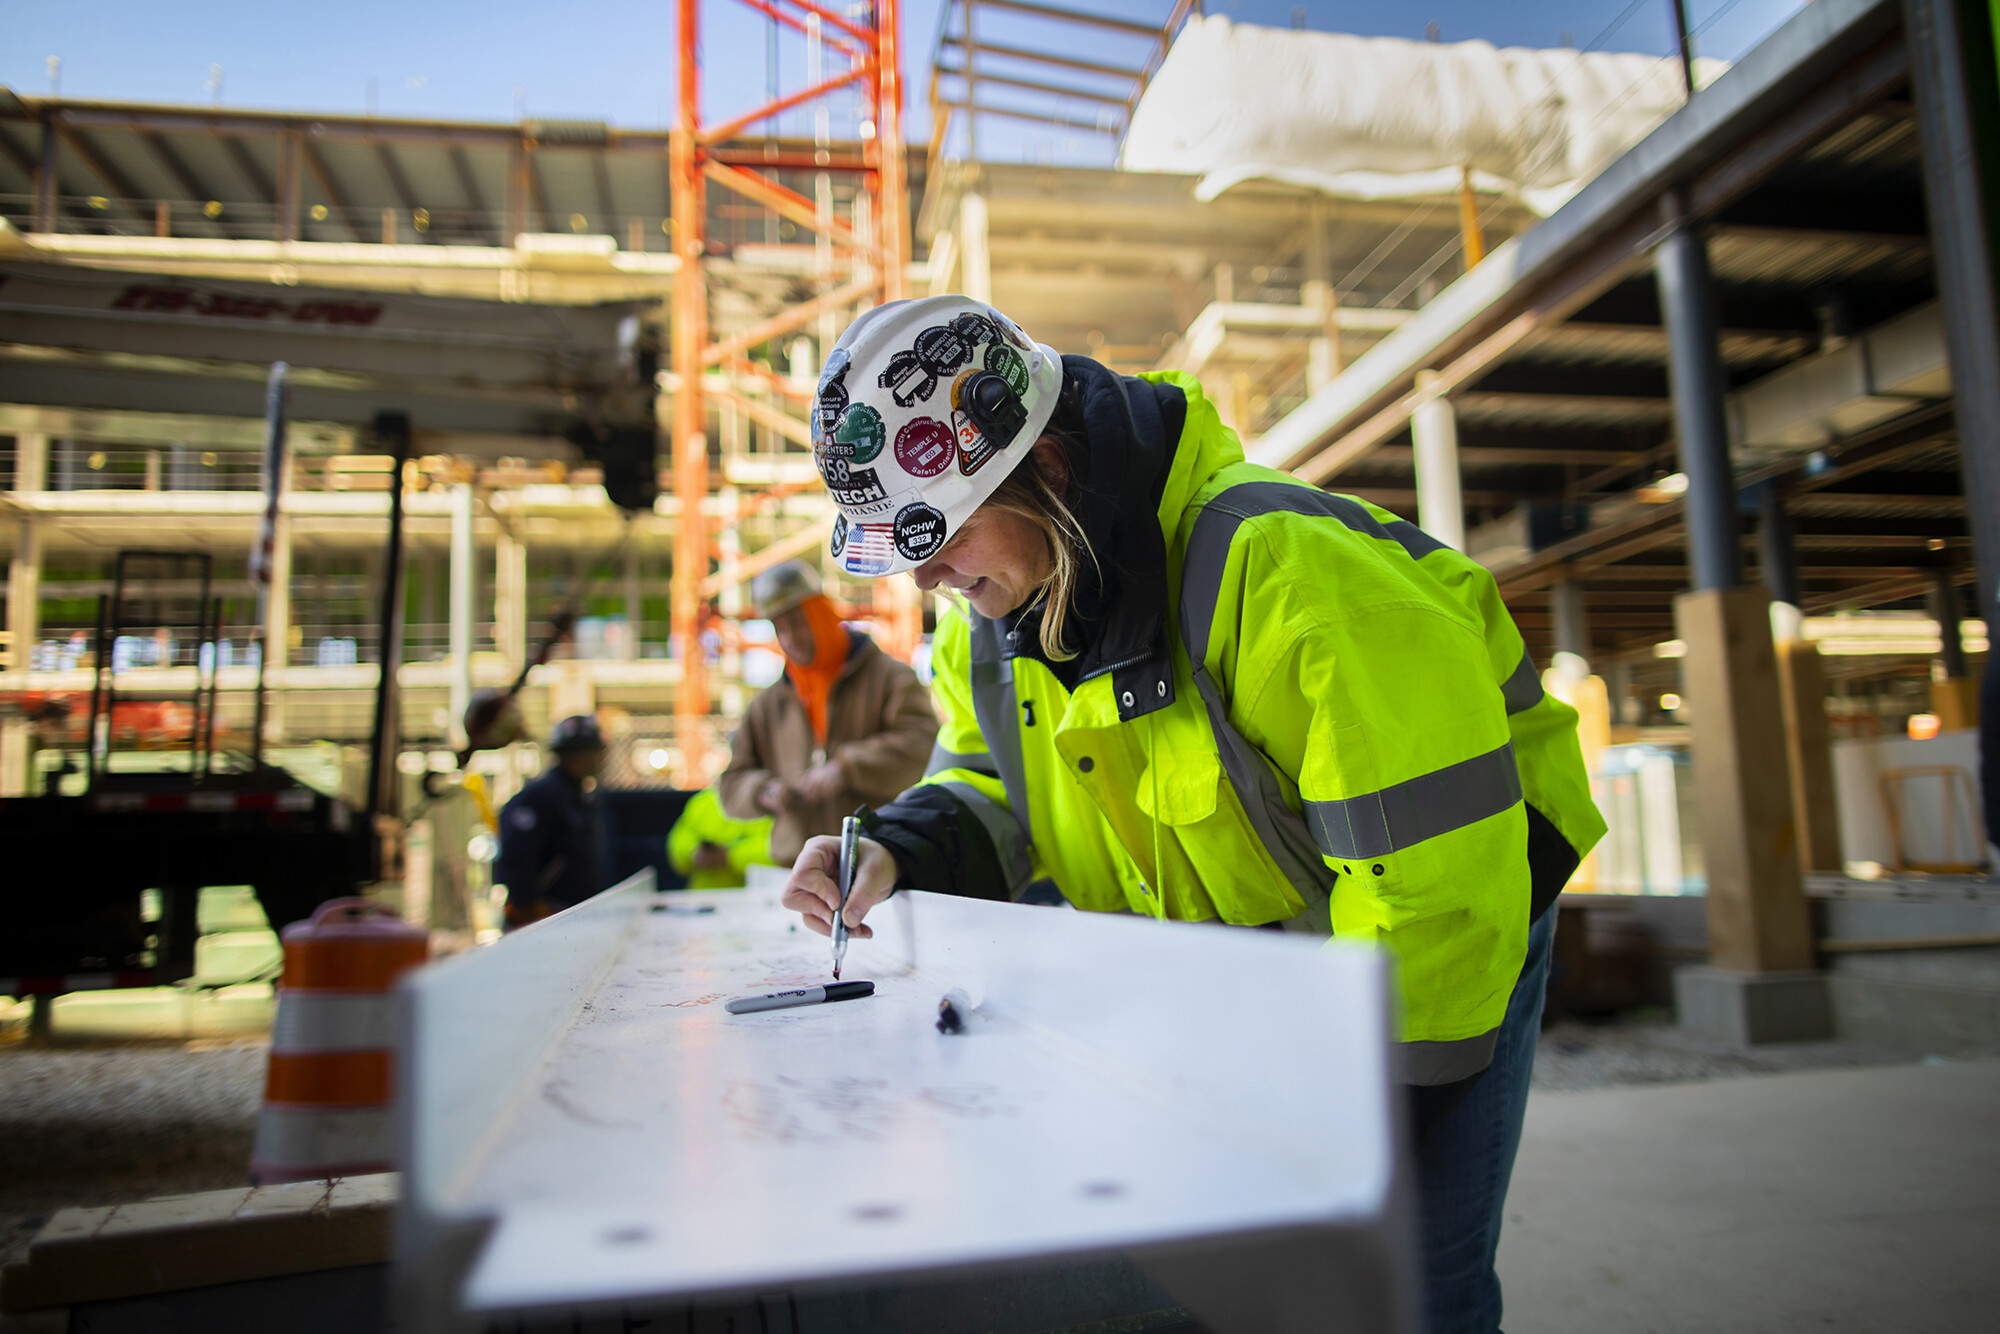 A worker in a hard hat smiles and signs the final beam with a Sharpie